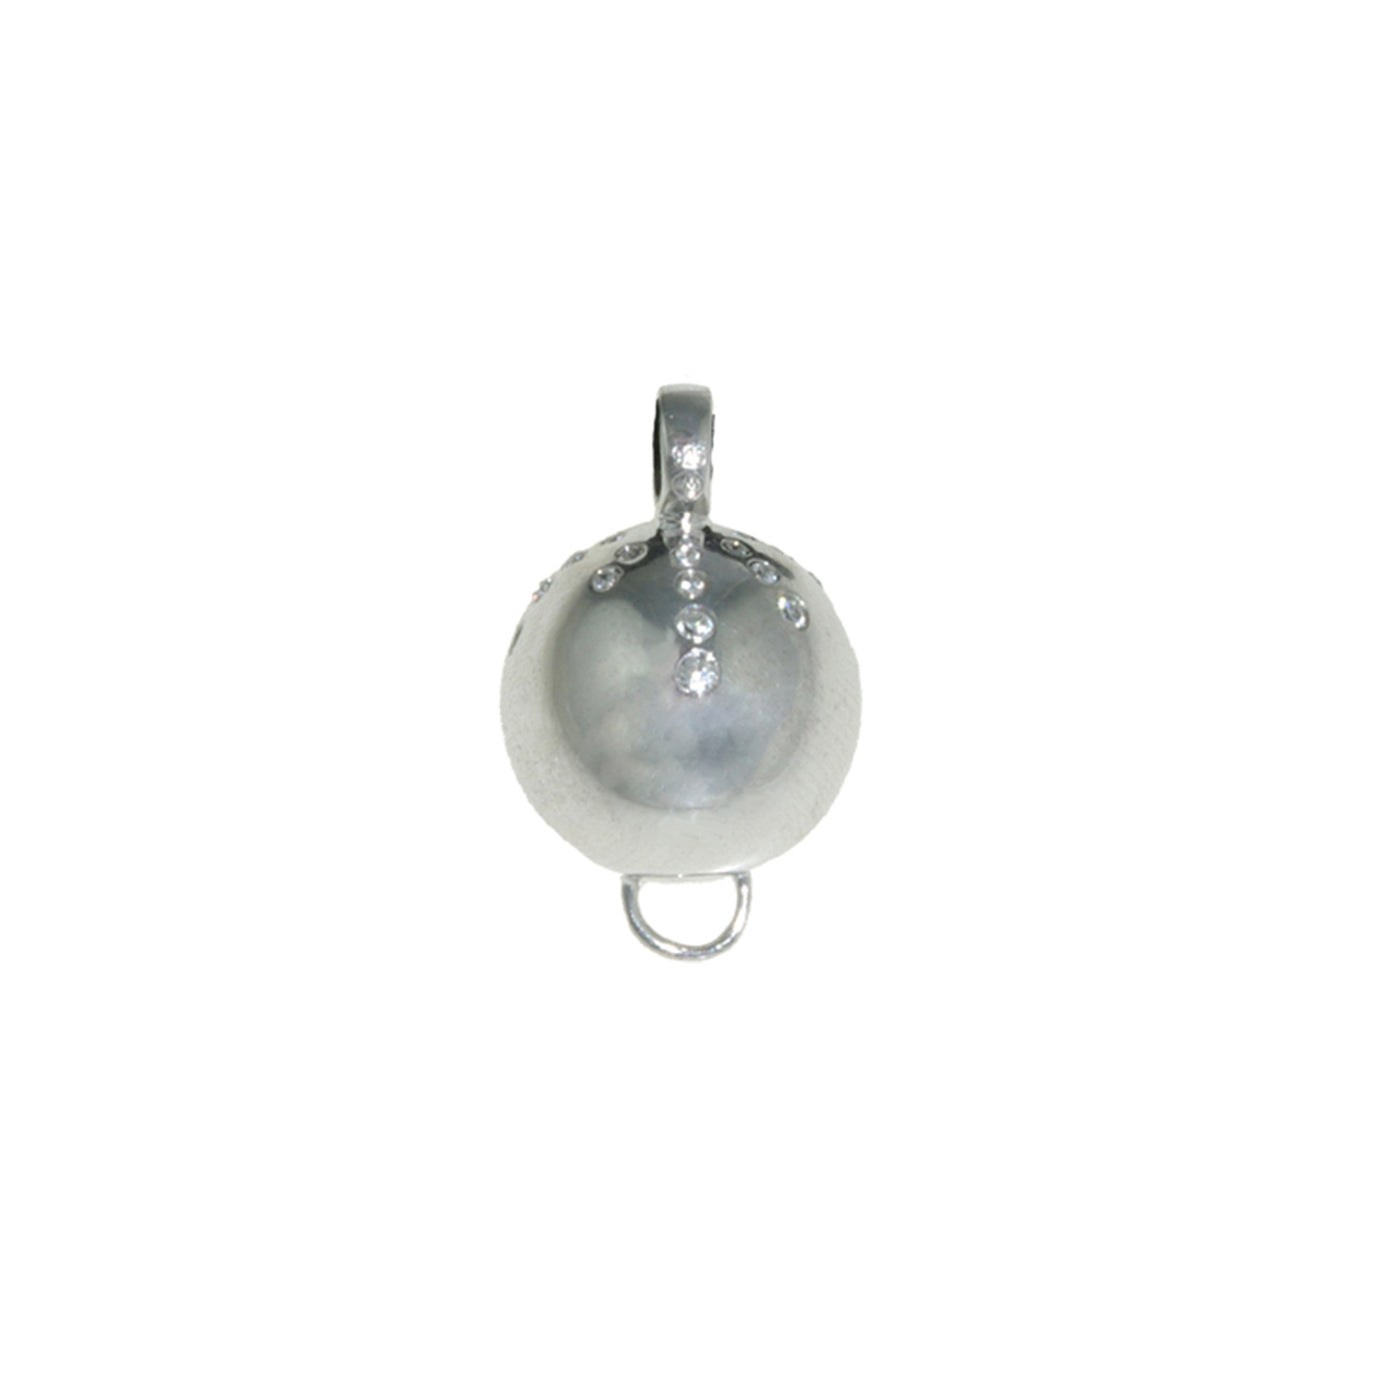 Rebecca Sloane Sterling Silver Necklace With Ball Charm